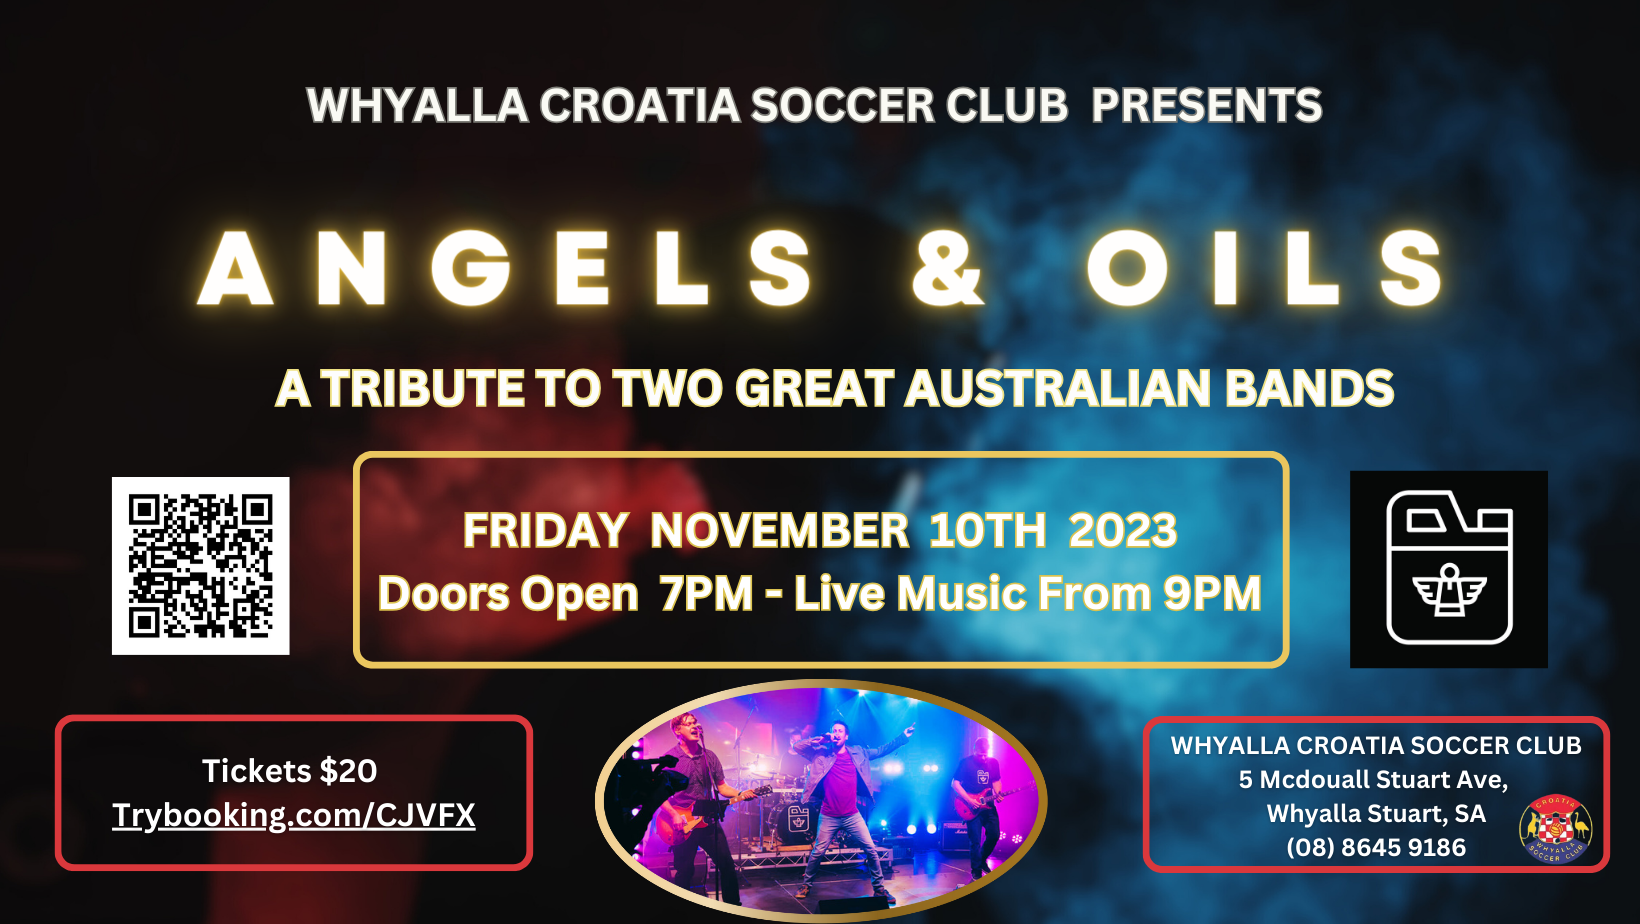 ANGELS and OILS A TRIBUTE TO TWO GREAT AUSTRALIAN BANDS Tickets, Whyalla Croatia Soccer Club, Whyalla Stuart TryBooking Australia